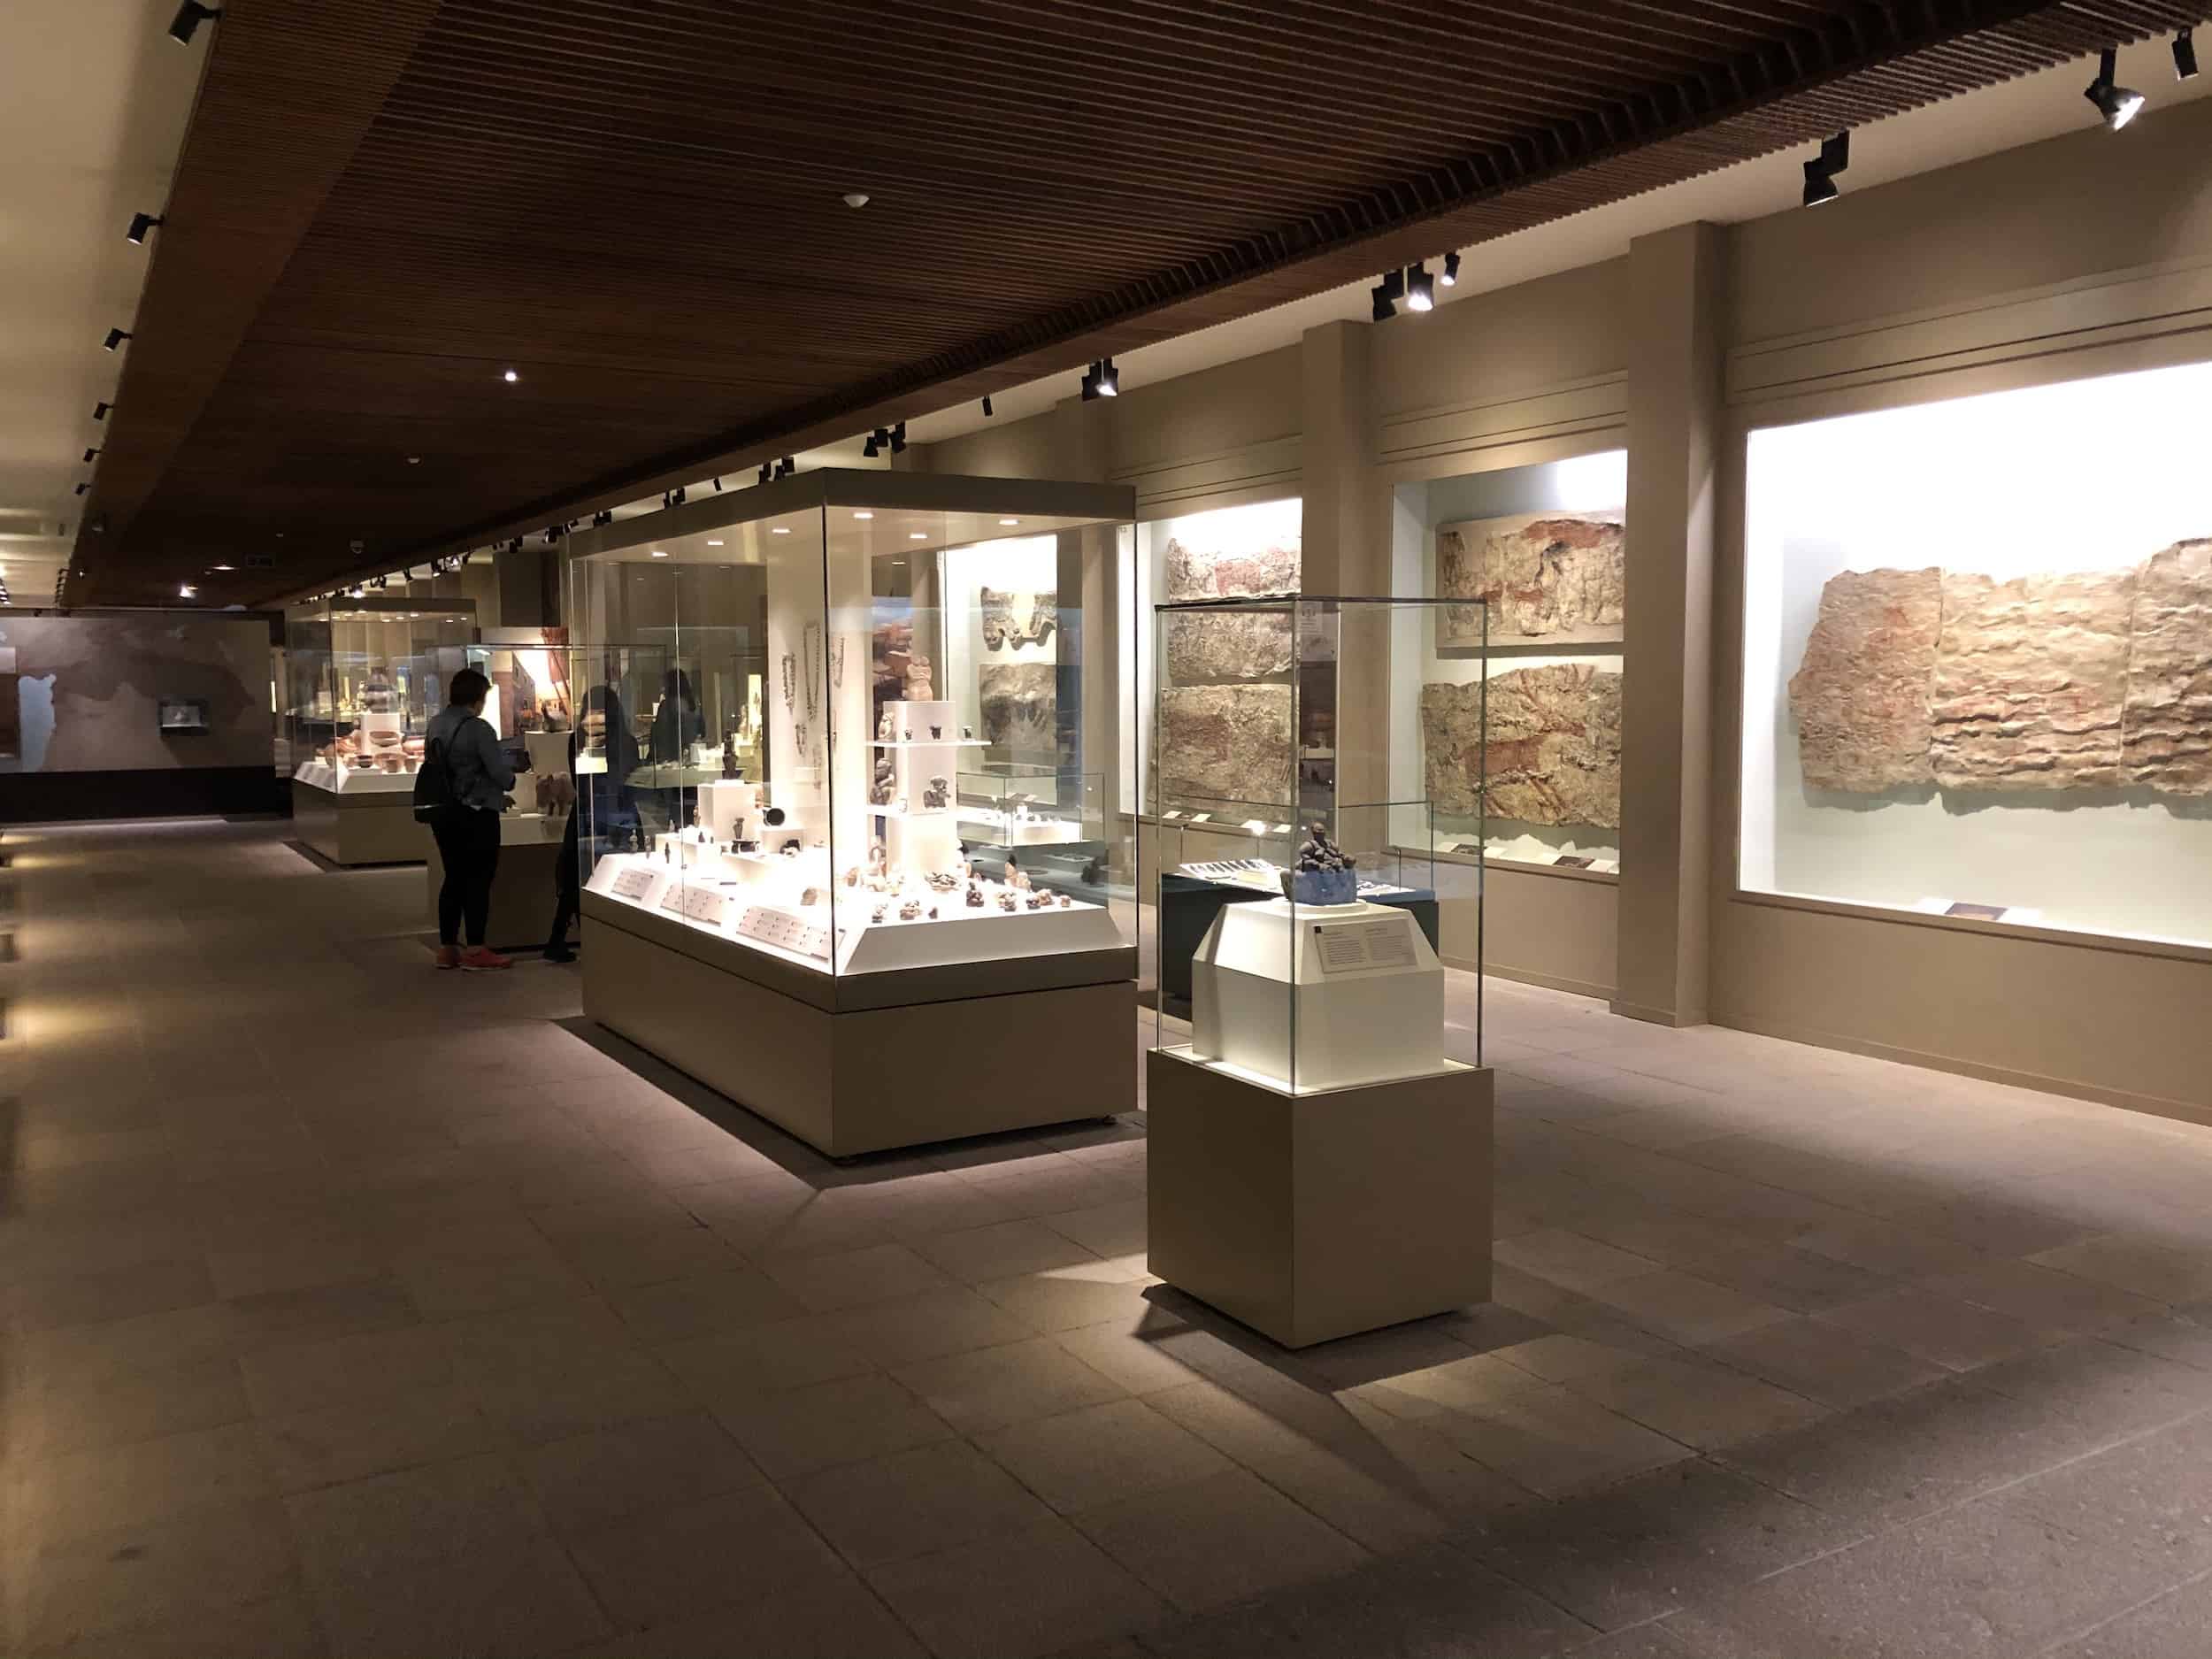 Neolithic Age section at the Museum of Anatolian Civilizations in Ankara, Turkey